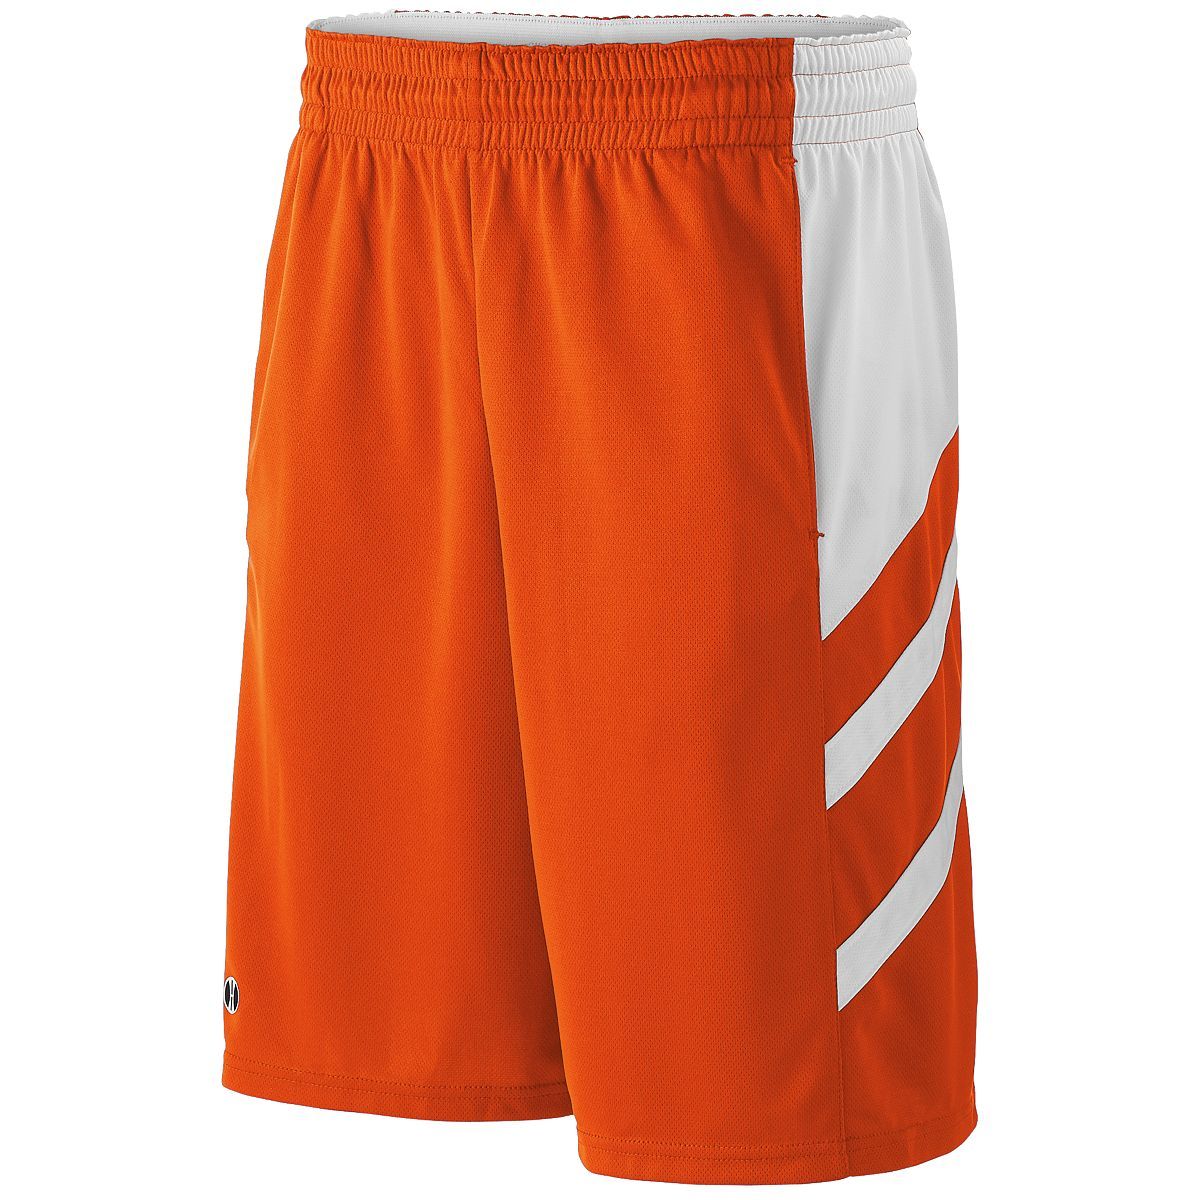 Holloway Helium Shorts in Orange/White  -Part of the Adult, Adult-Shorts, Holloway product lines at KanaleyCreations.com